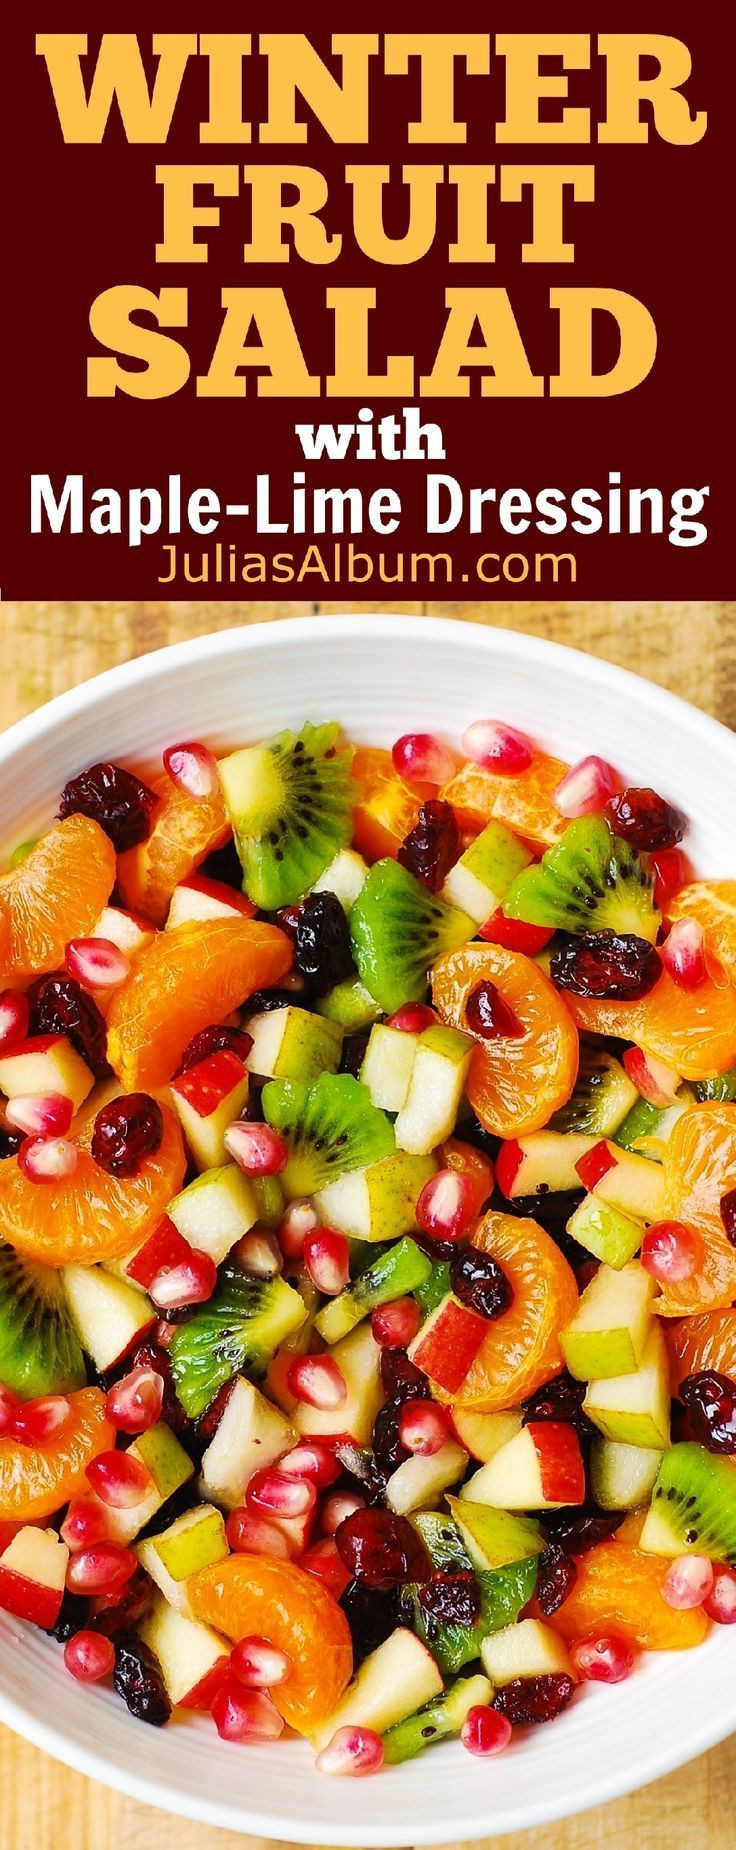 Winter Fruit Salad Ideas
 Winter Fruit Salad with Maple Lime Dressing healthy